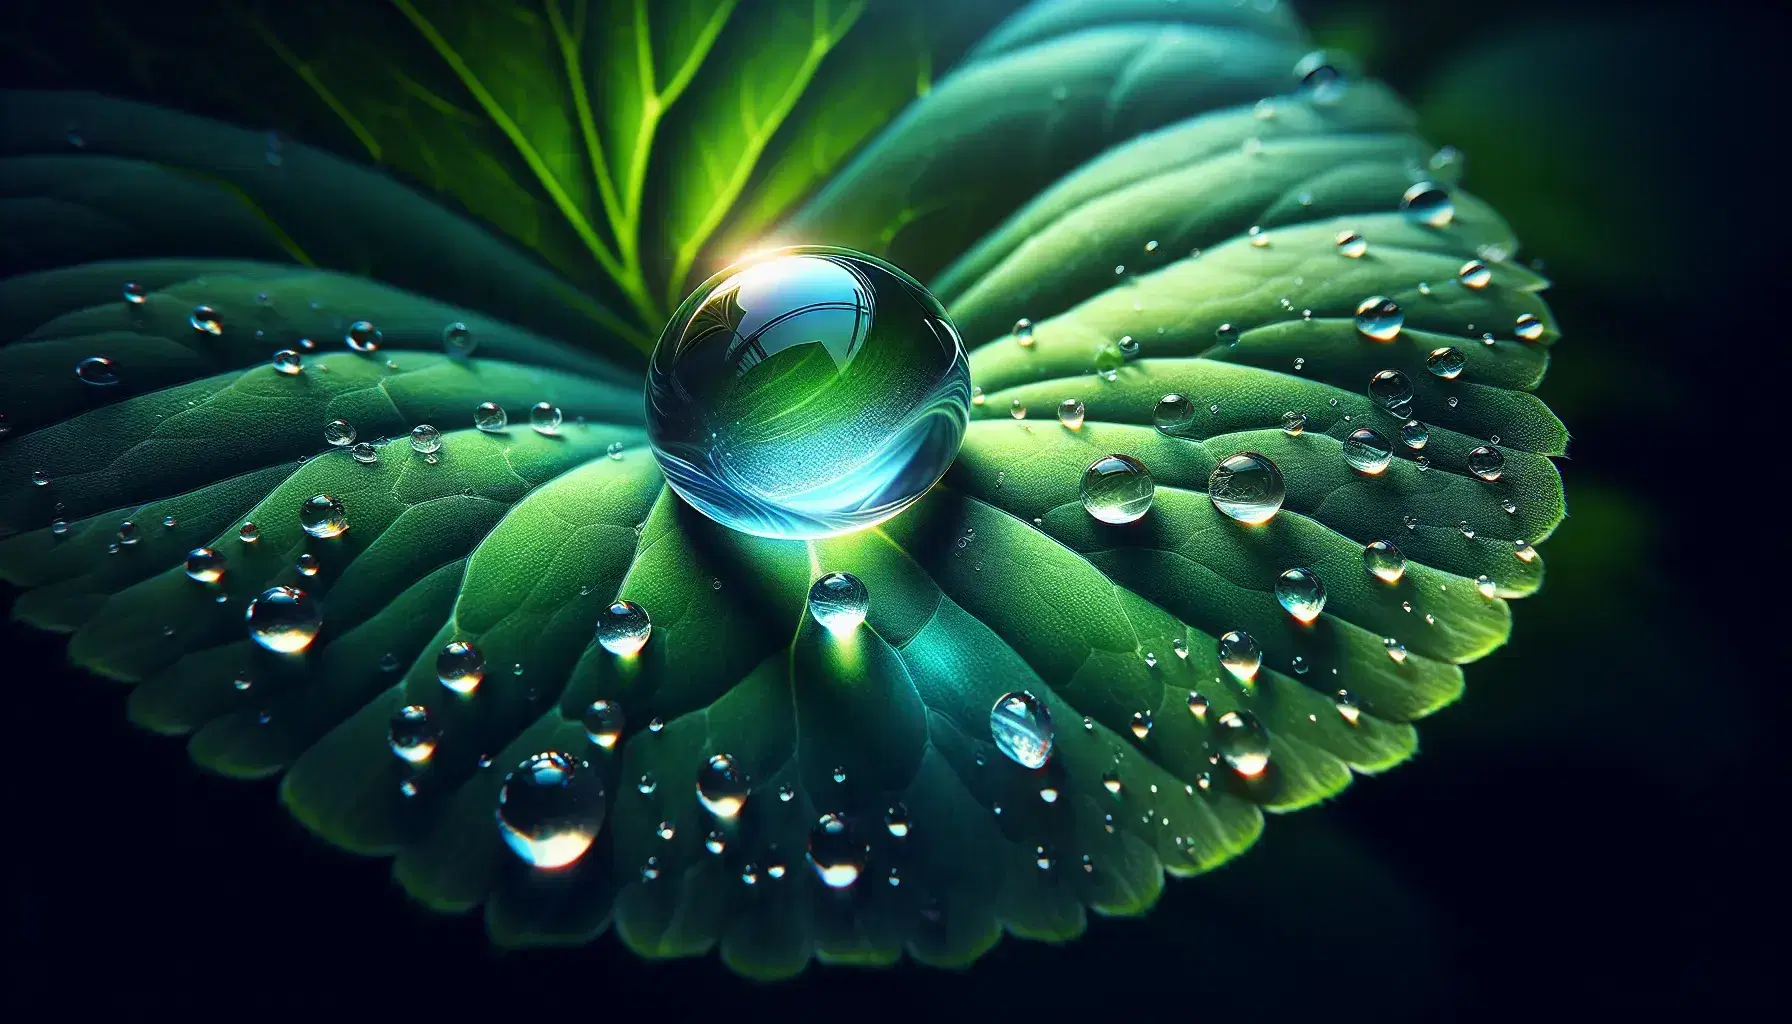 Spherical water drop on green shimmering leaf with colorful reflections, surrounded by small drops and green blurred background.